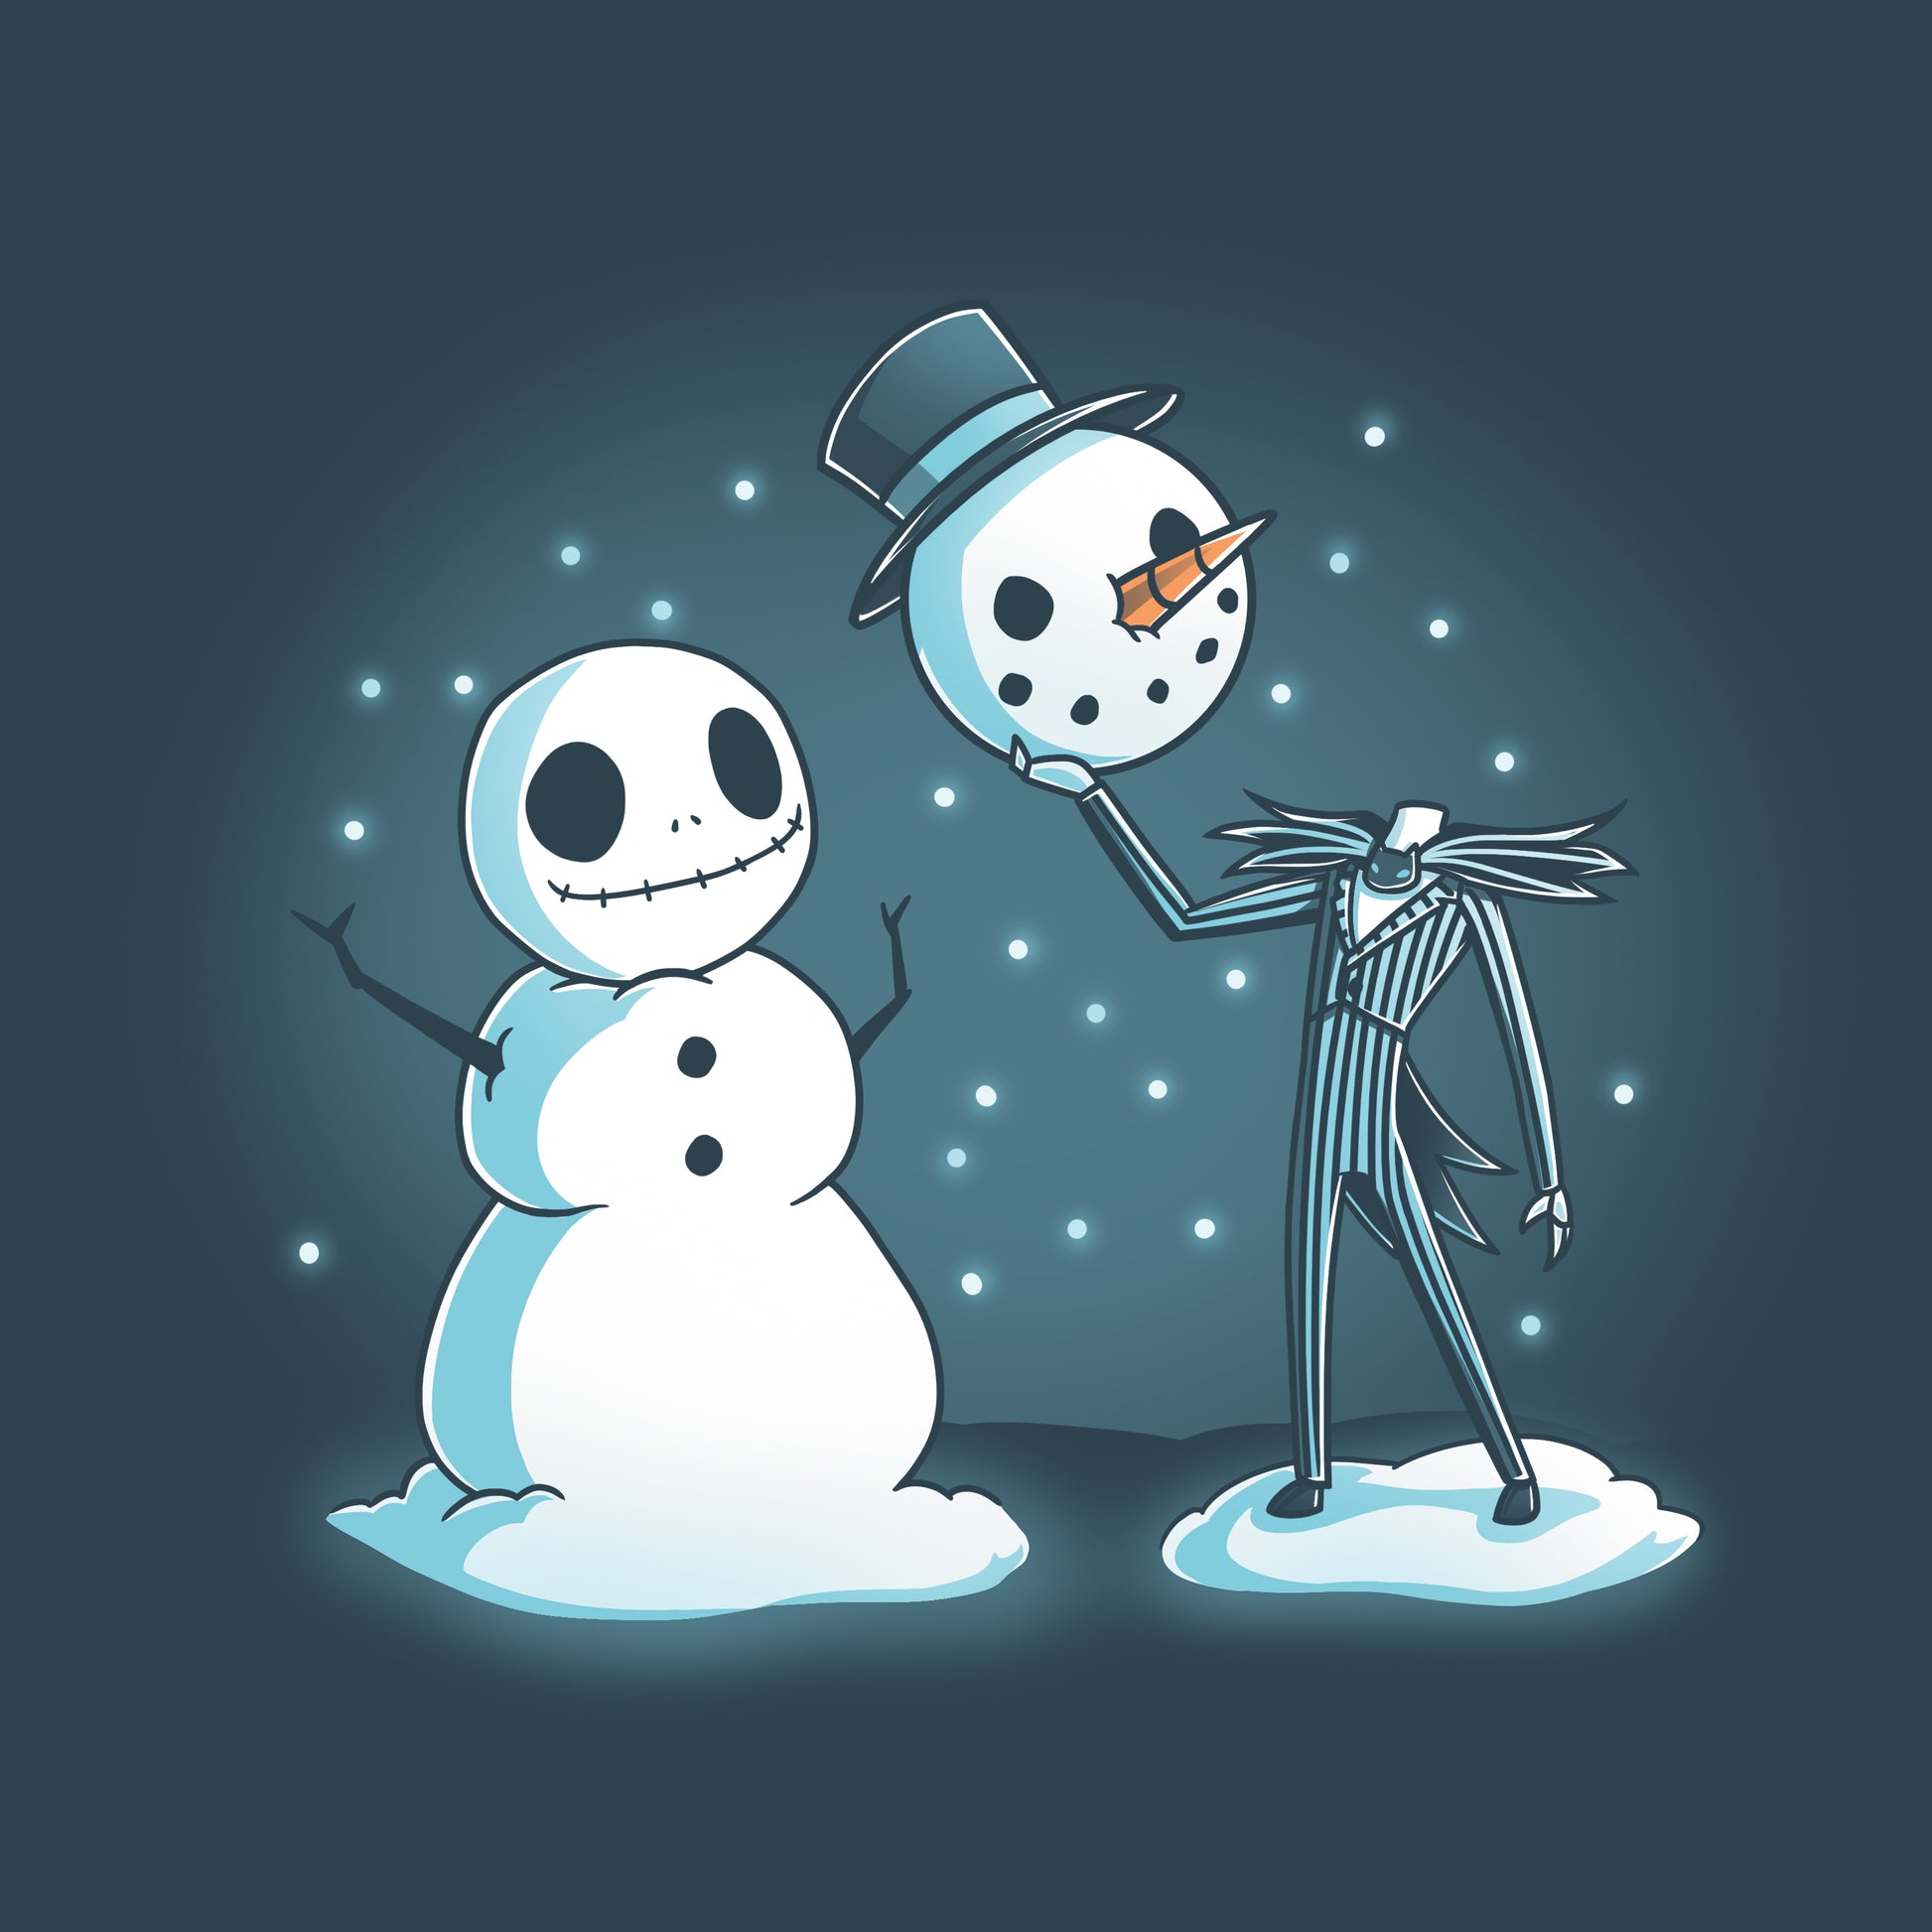 A Snowman King and Snowman Jack from The Nightmare Before Christmas standing next to each other.